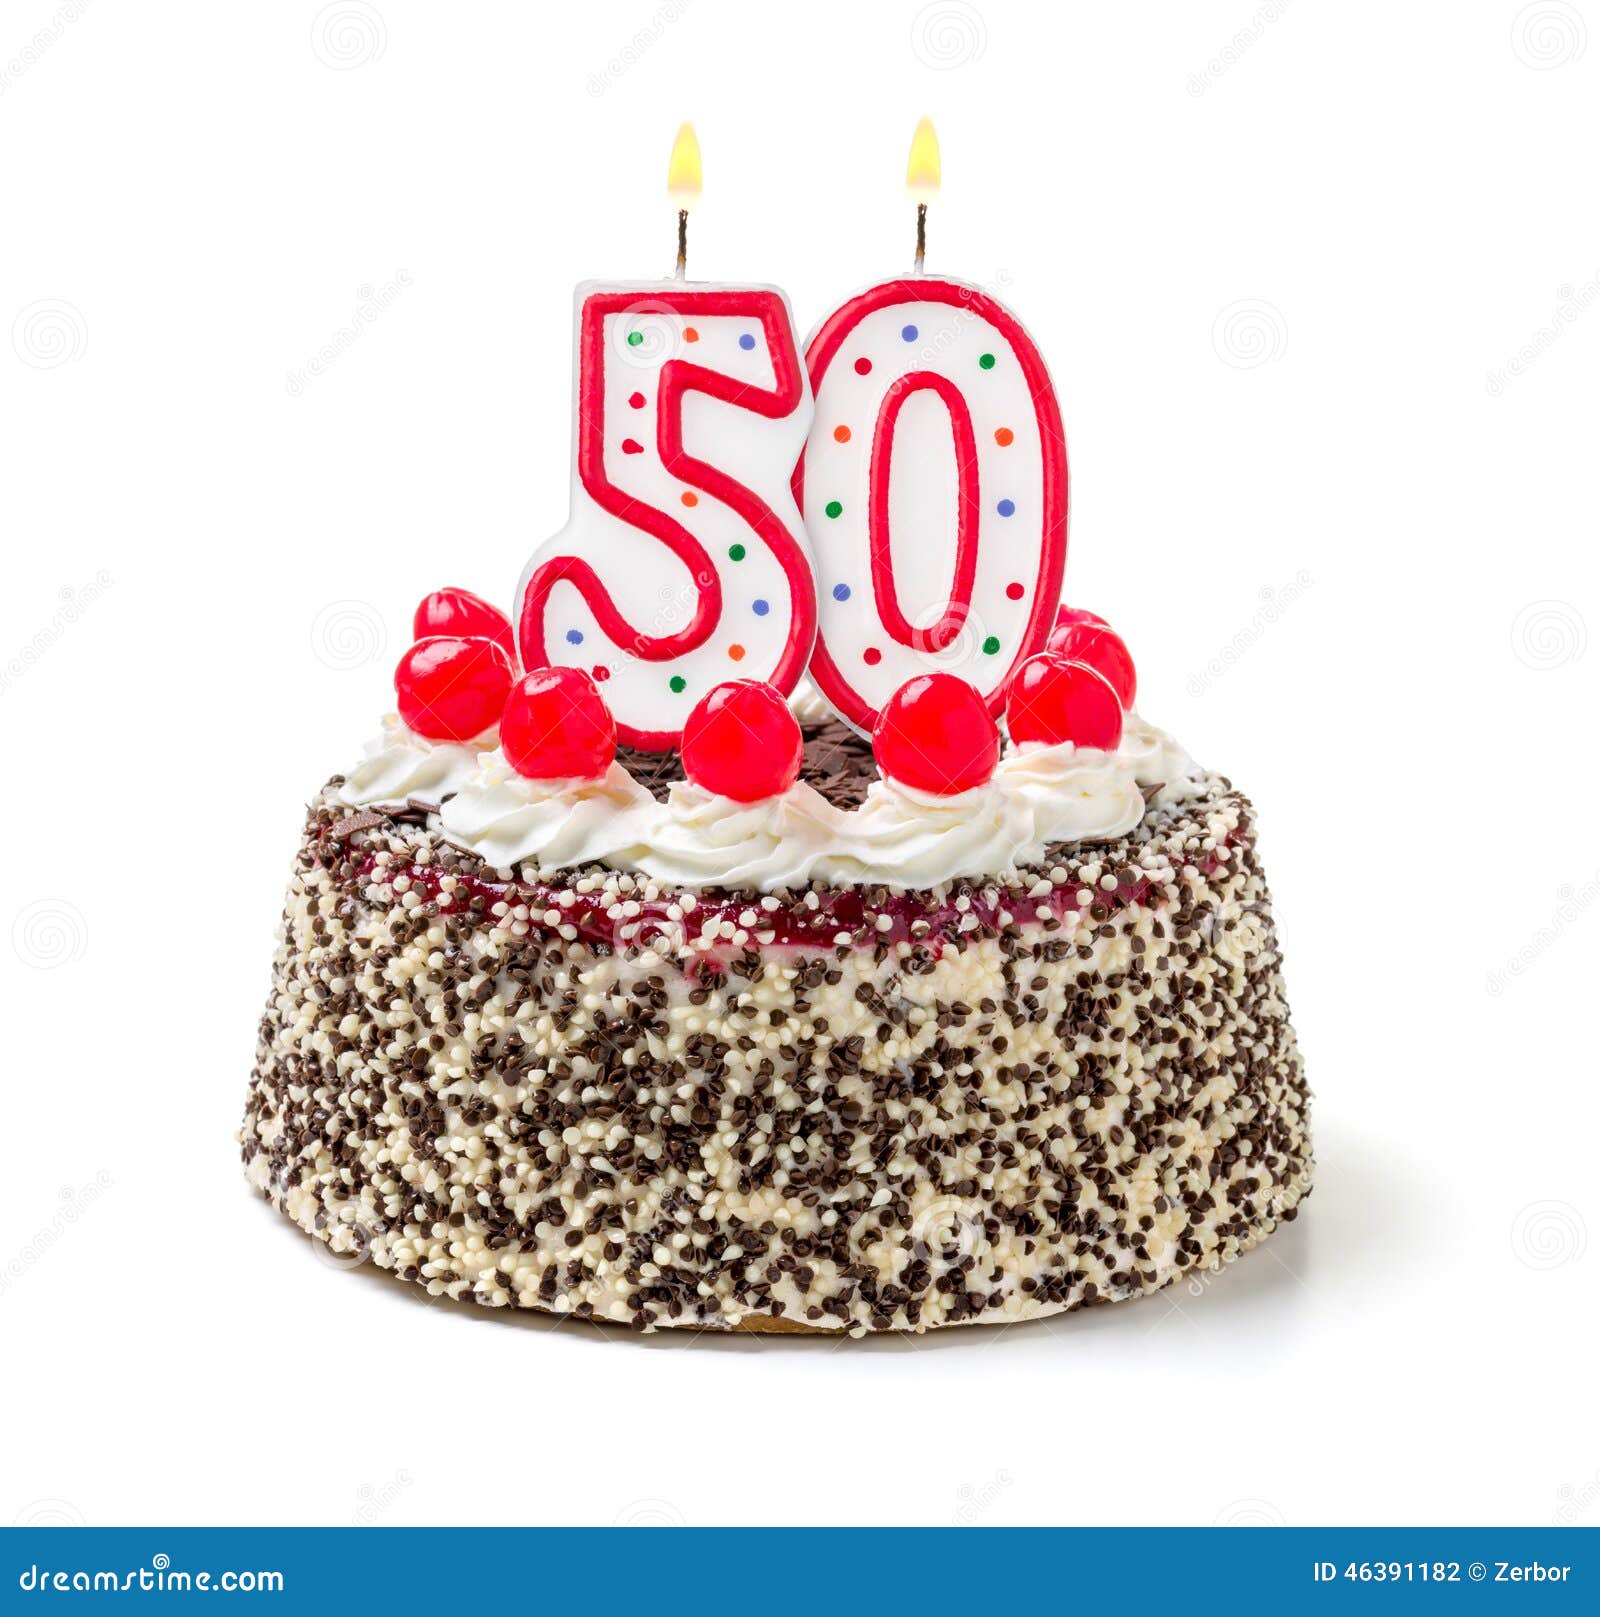 List 102+ Images 50 candles on a birthday cake images Sharp